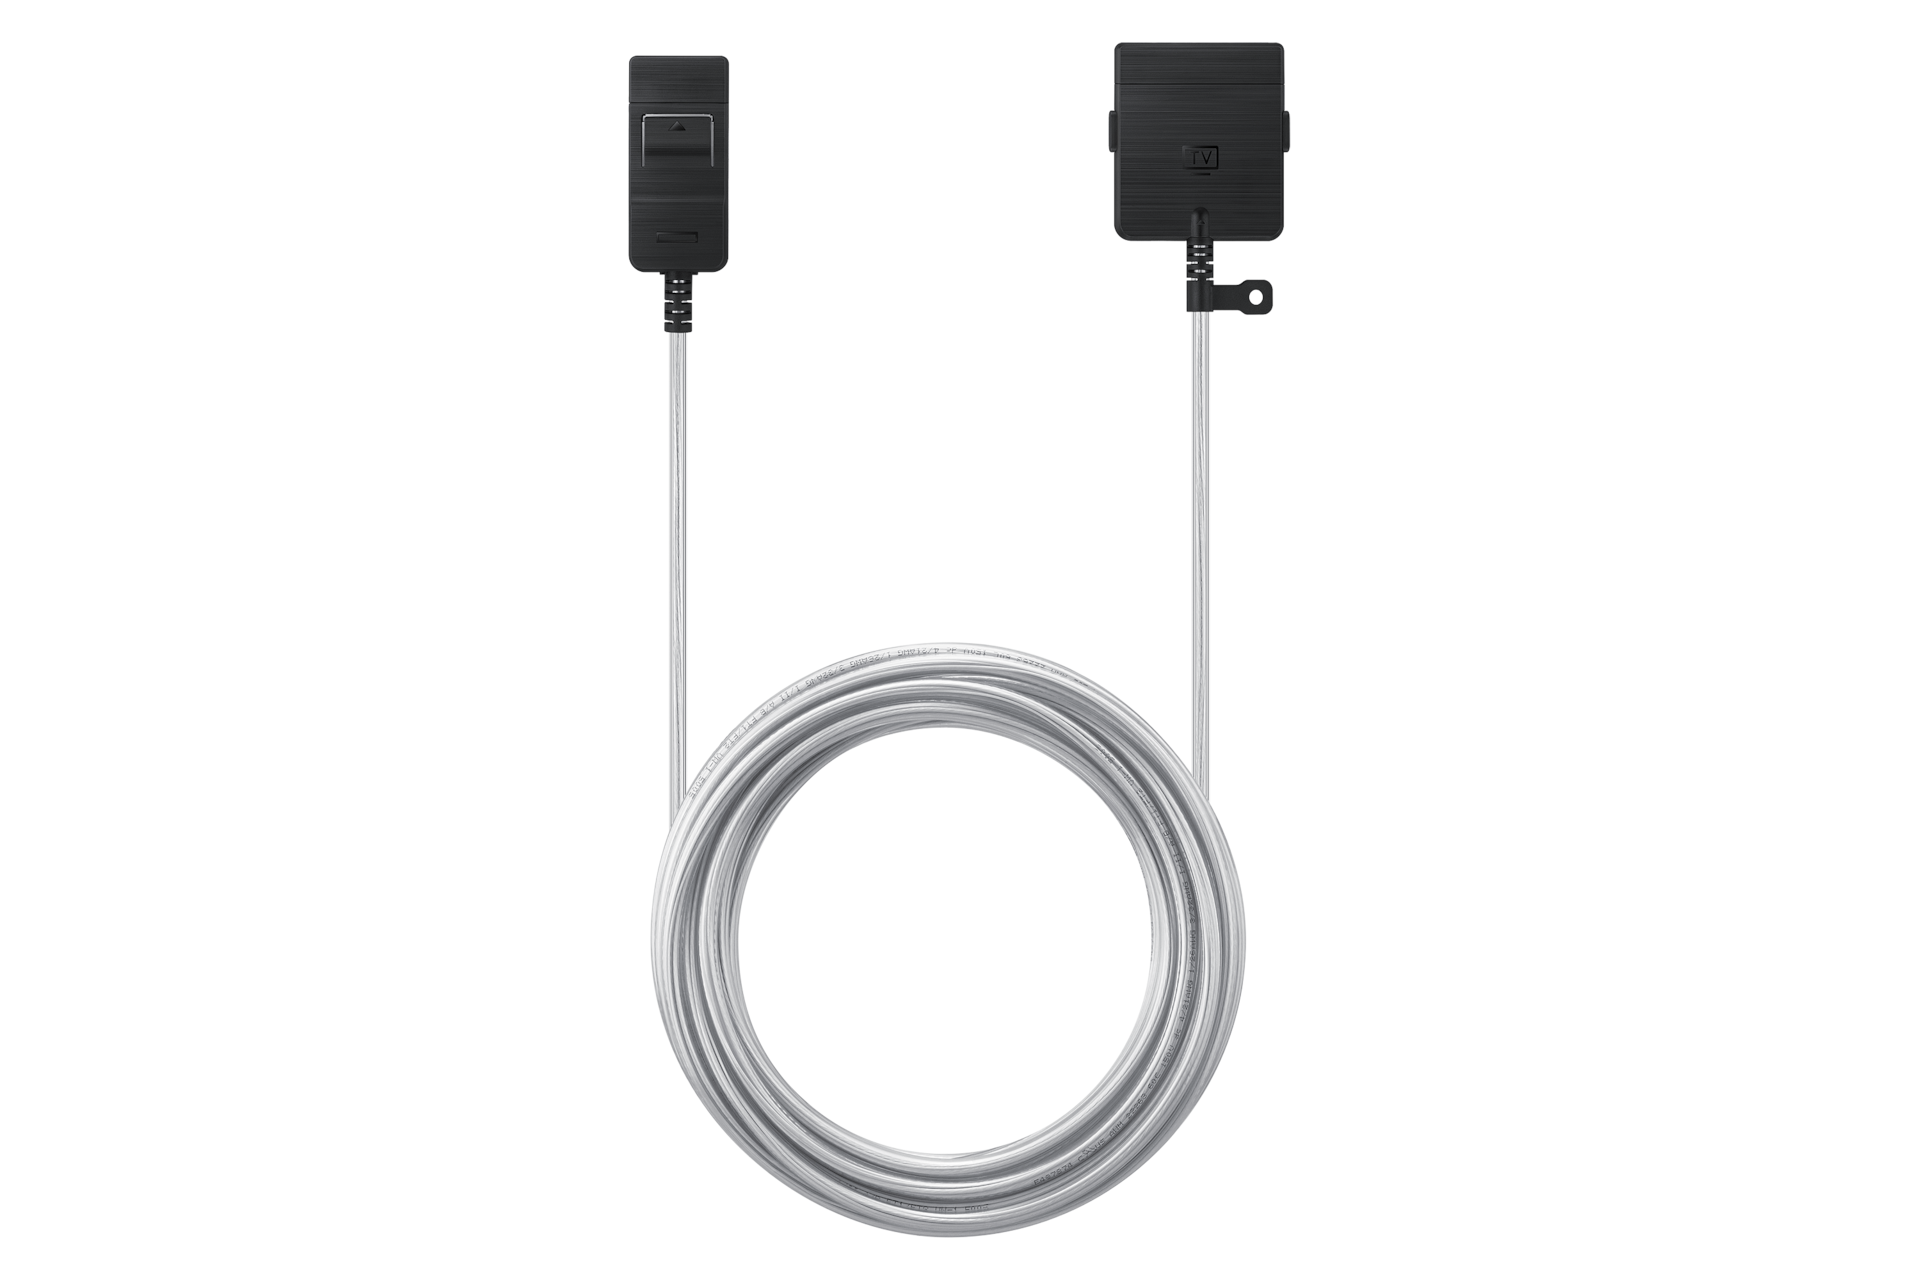 VG-SOCT87 QLED TV Invisible Connection Cable